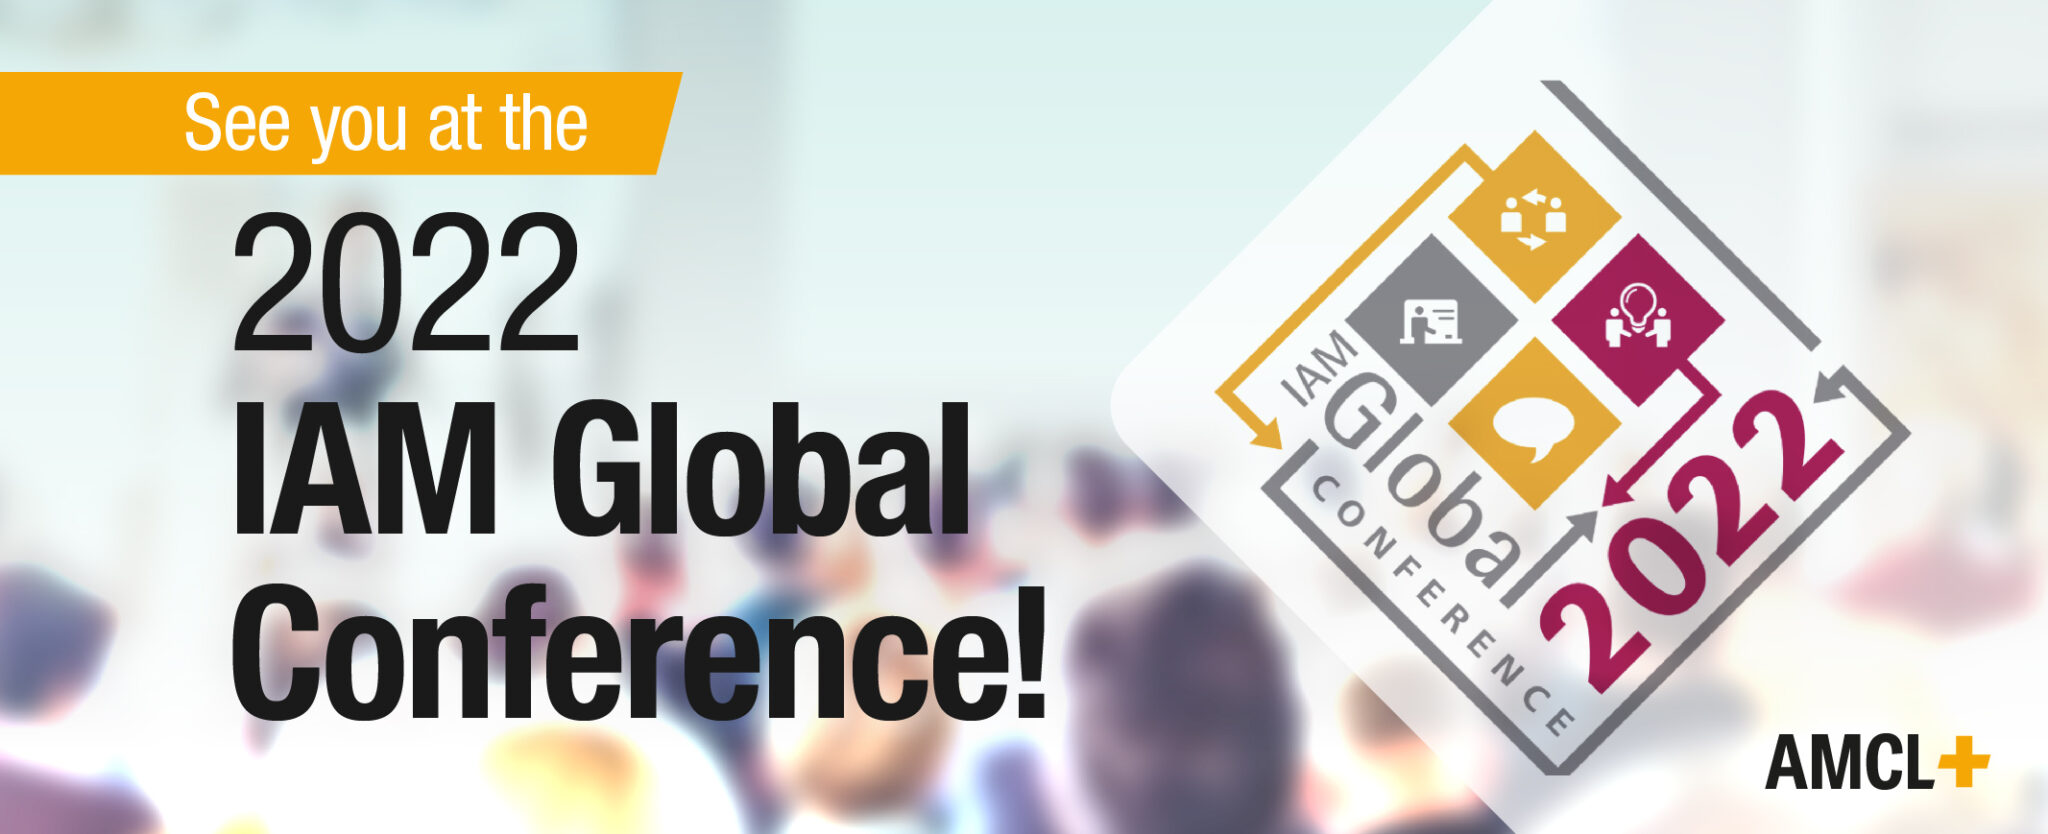 See you at the 2022 IAM Global Conference! AMCL